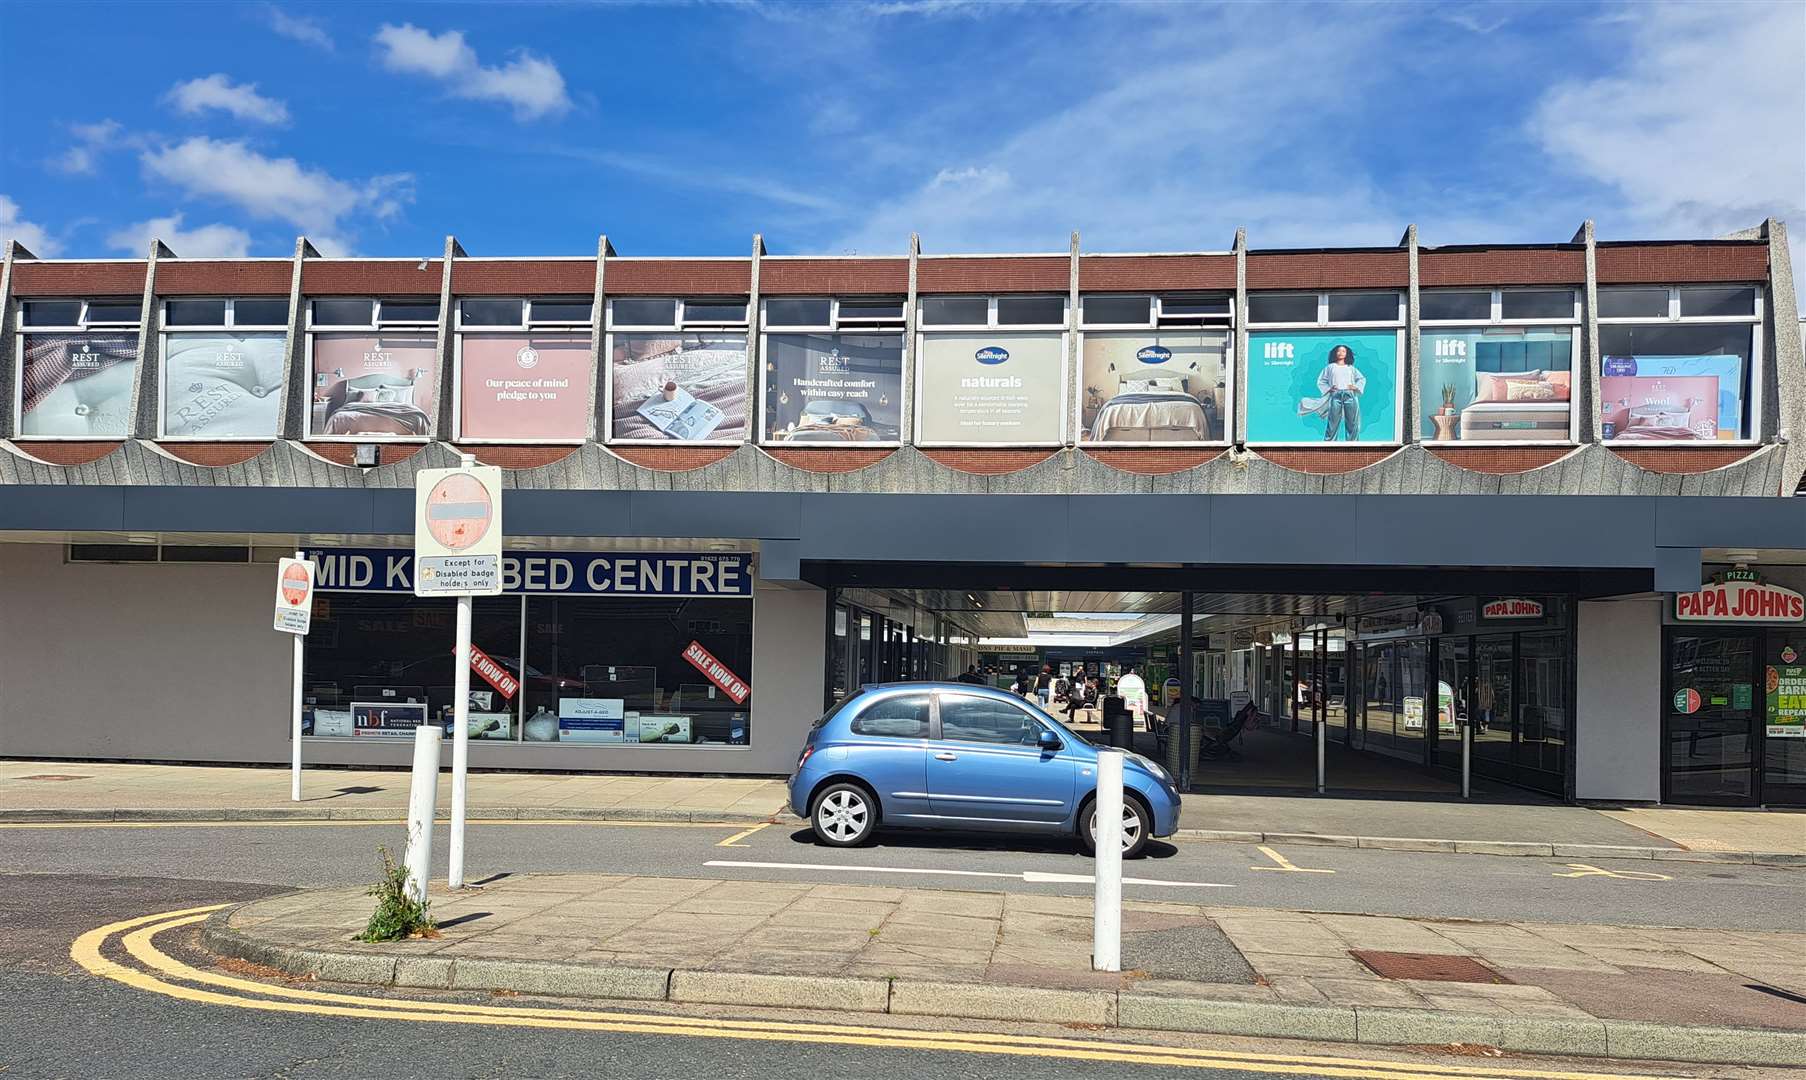 The Mid Kent Shopping Centre